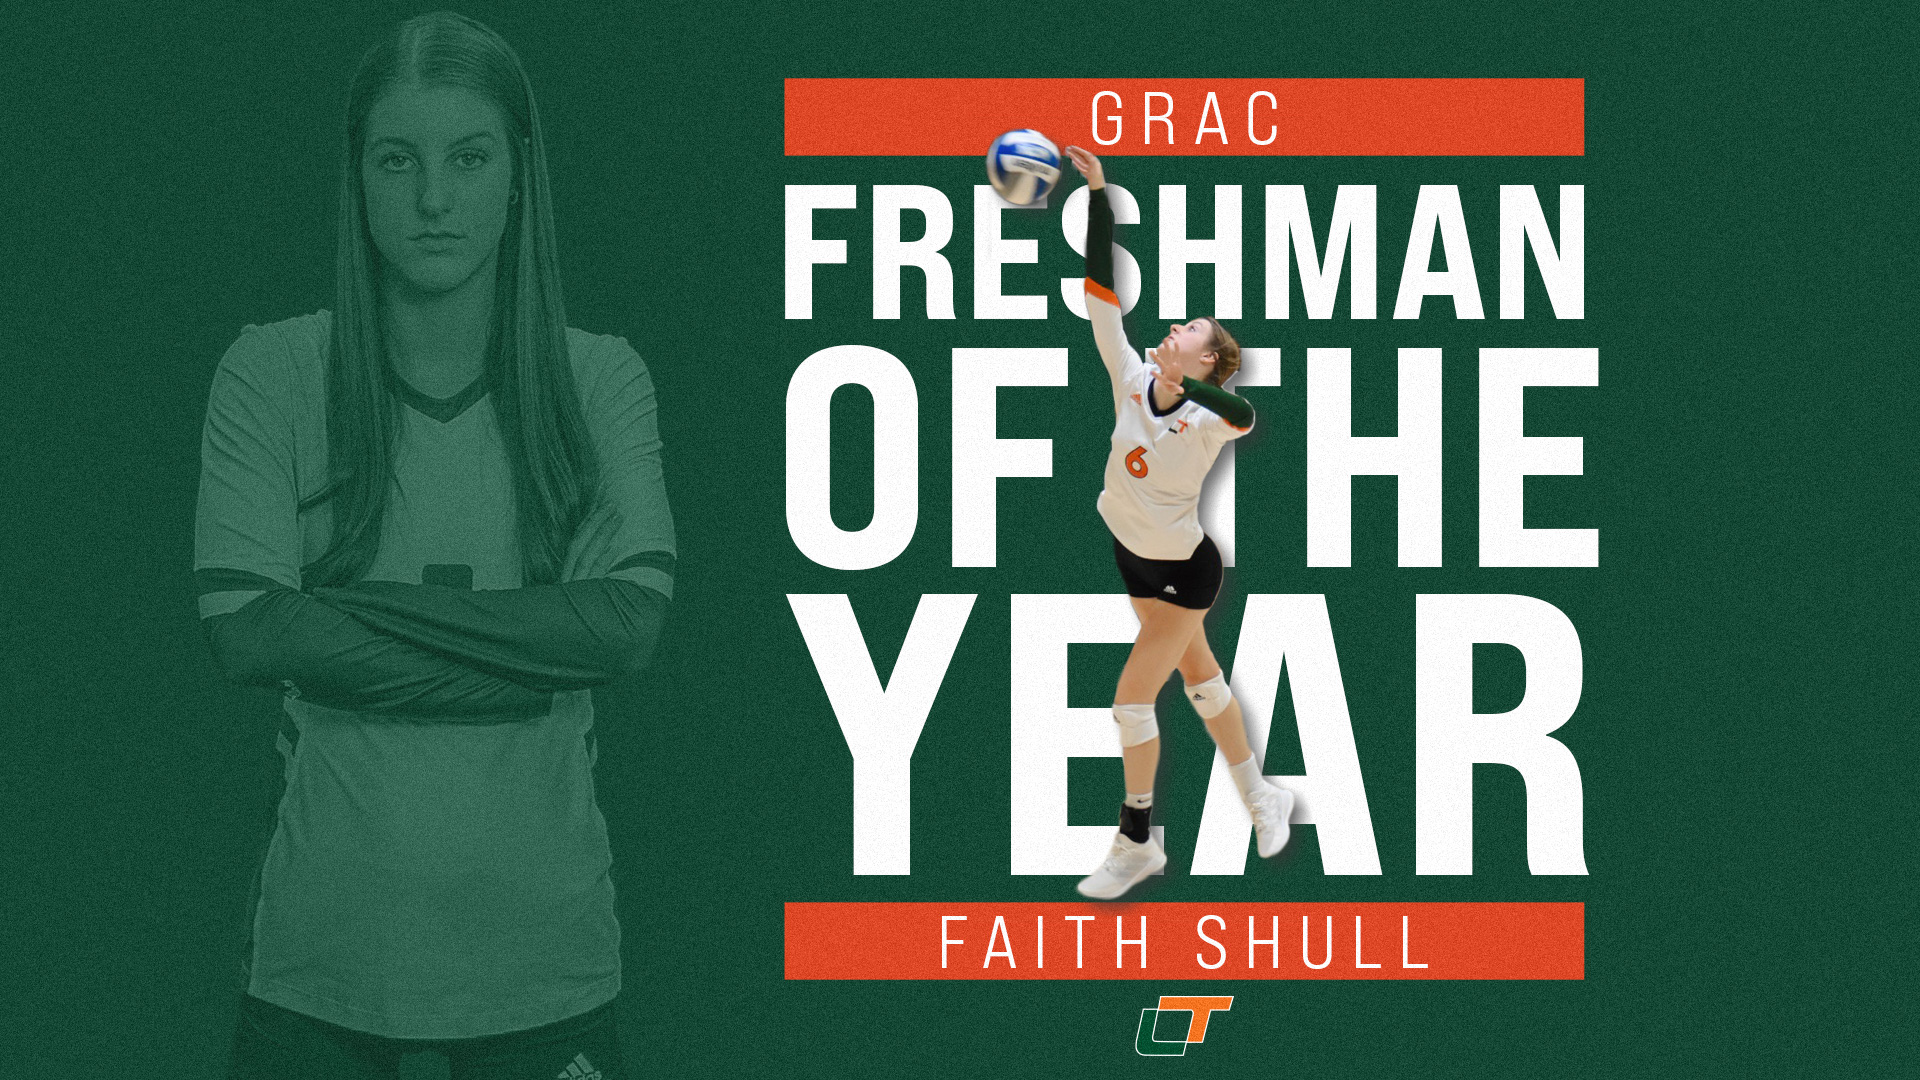 A graphic featuring photos of Faith Shull with the text GRAC Freshman of the Year